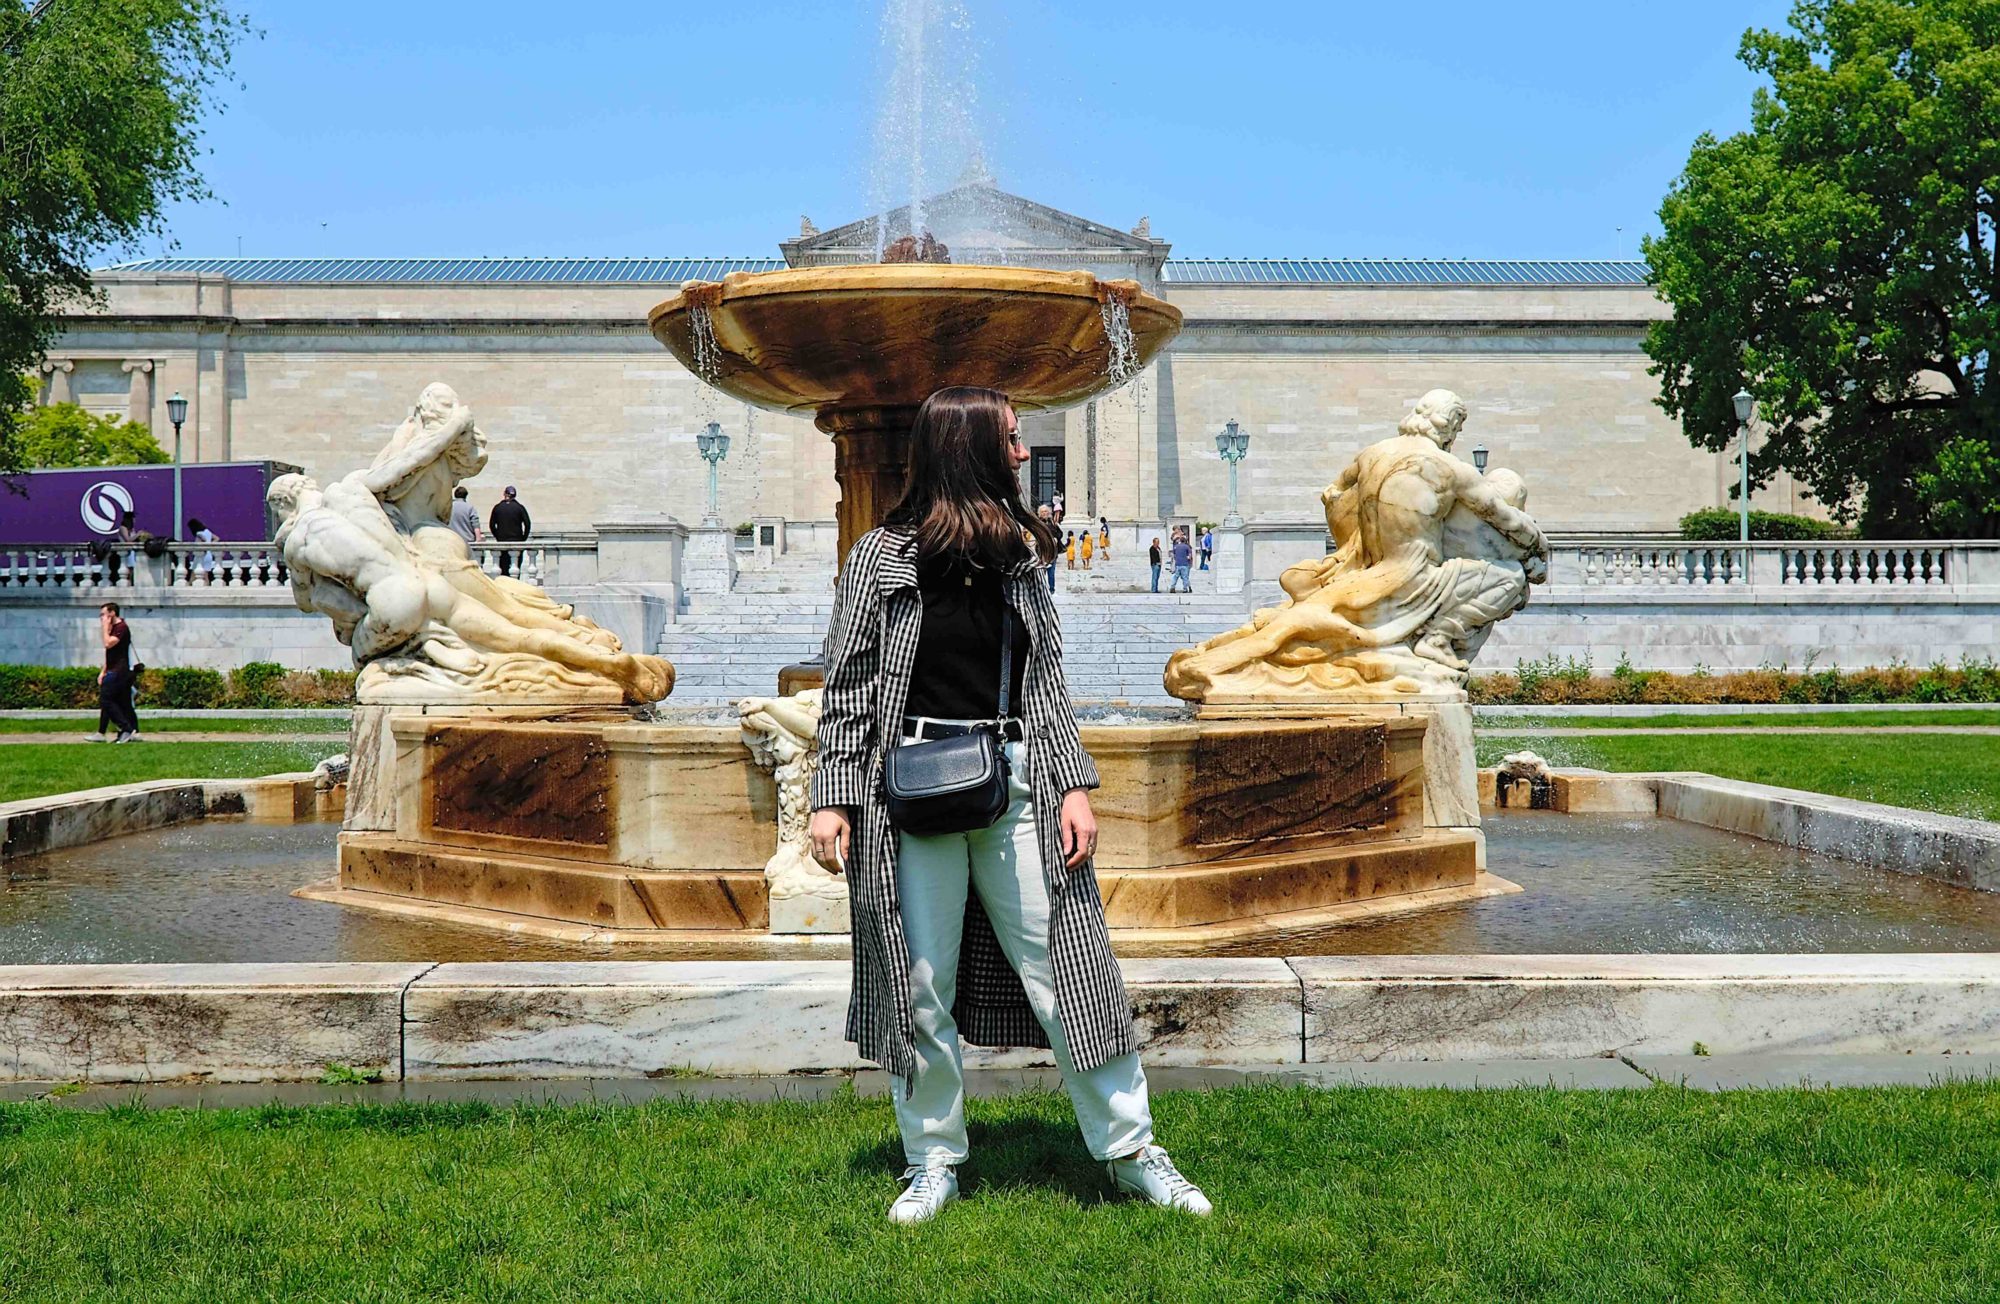 Alyssa stands in front of The Cleveland Museum of Art fountain